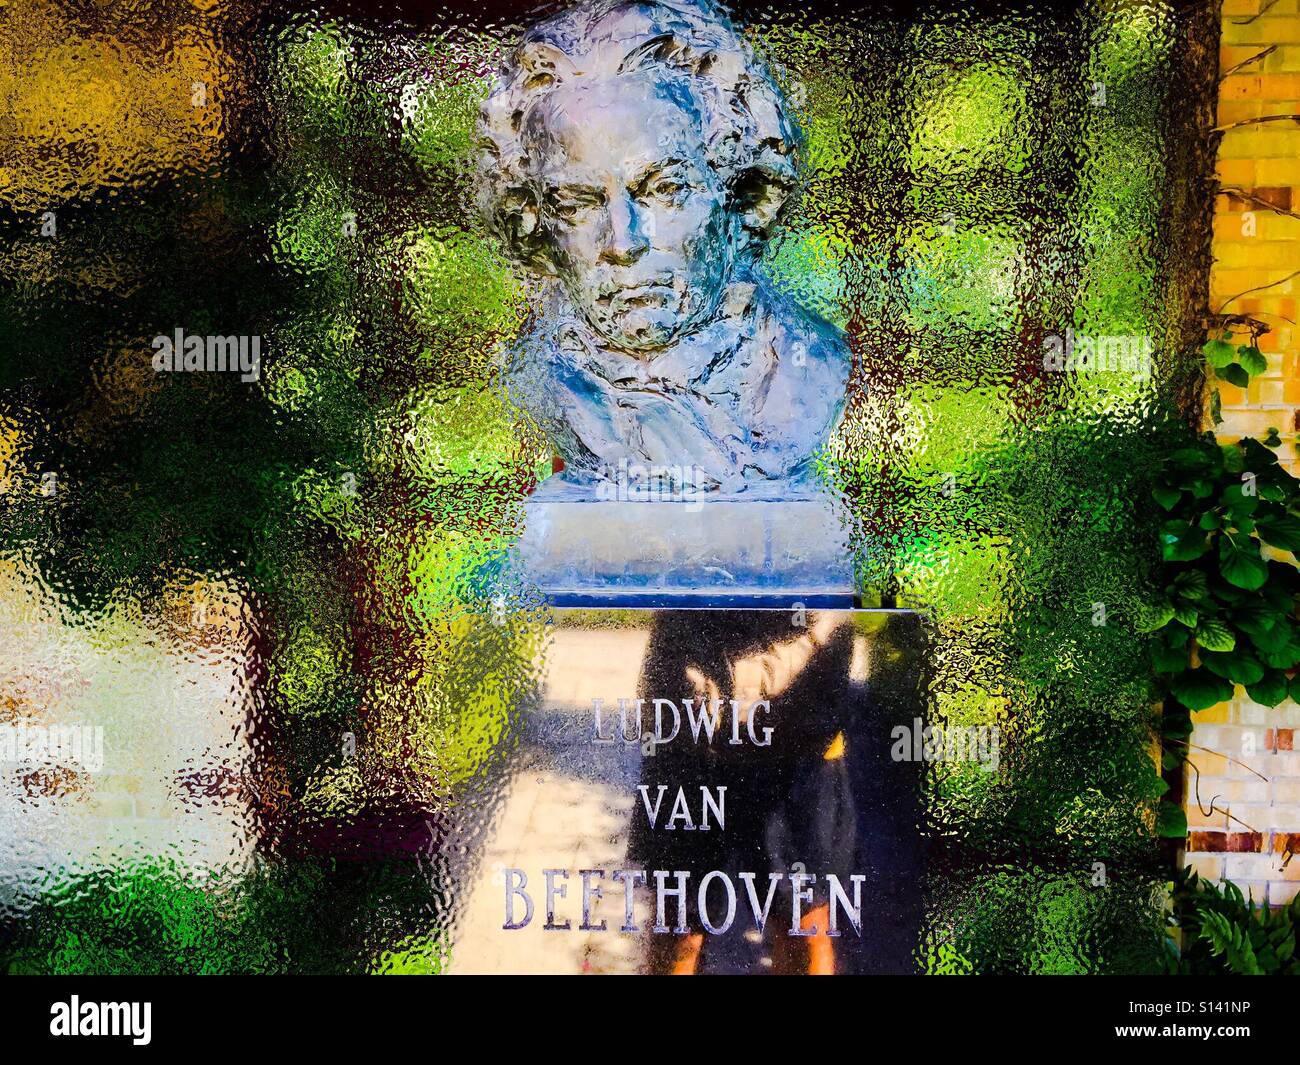 Beethoven in the park, Ontario, Canada. No geographic connection. Beethoven never came here, but his music is everywhere. Just a response to the universal appeal of his music. Stock Photo